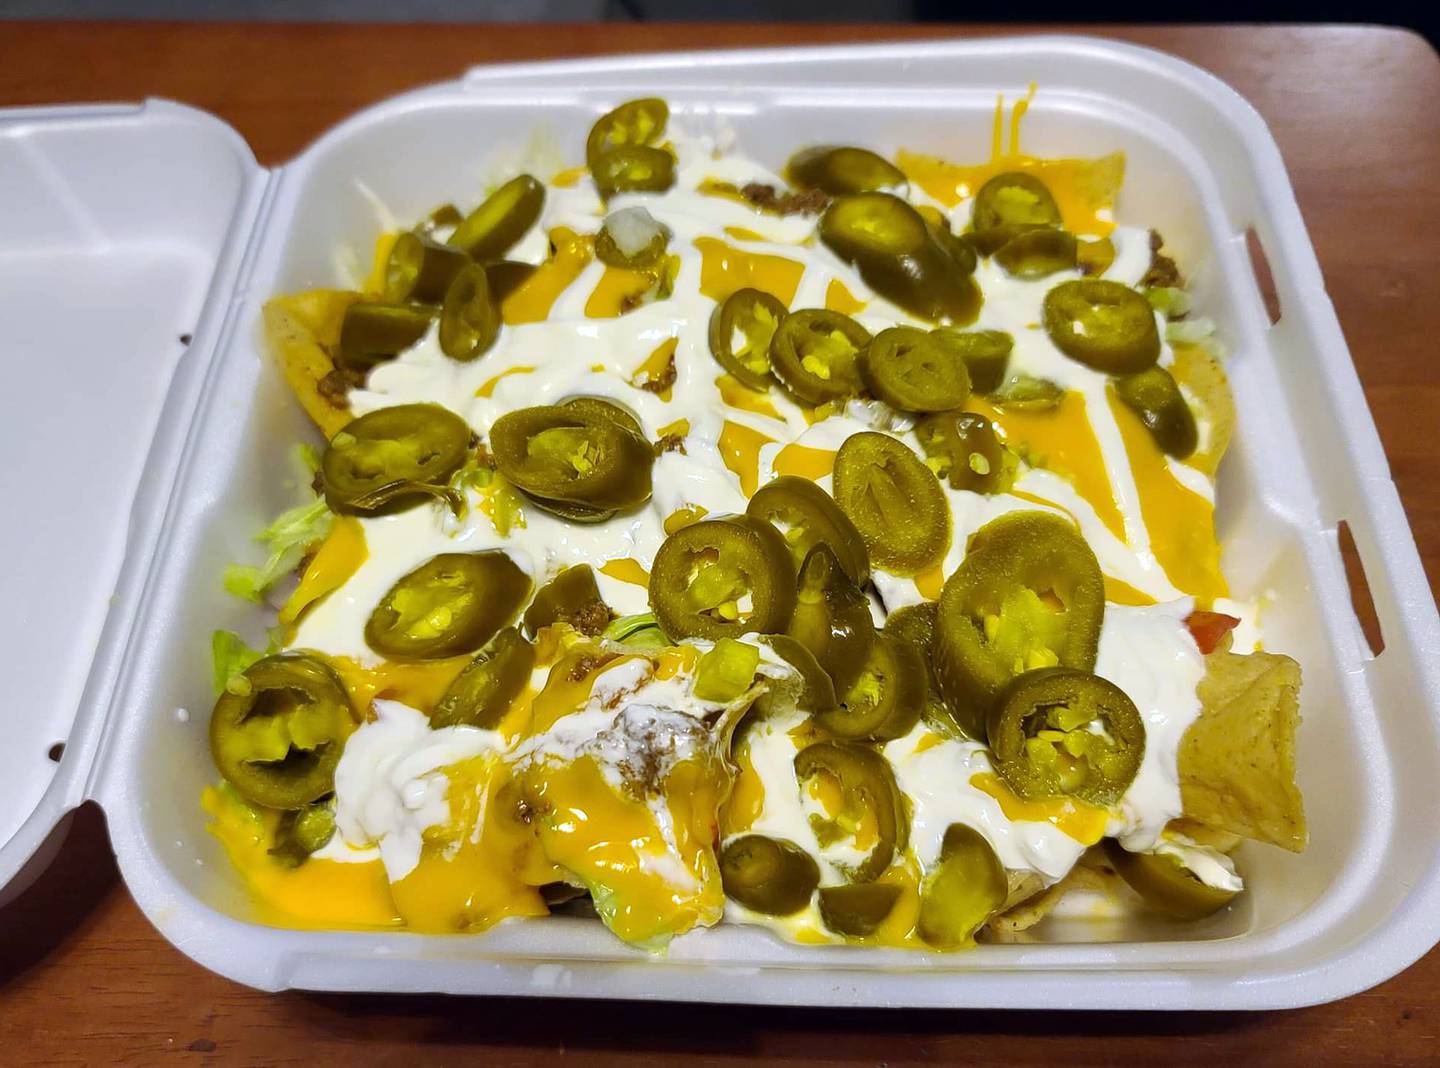 Ziggy's Bar & Grill in Marseille offers both dine-in and take-out.  This loaded nacho to-go appetizer — which includes ground beef, cheese sauce, onion, lettuce, tomato, and the optional addition of jalapenos — is large enough to serve as an entrée.